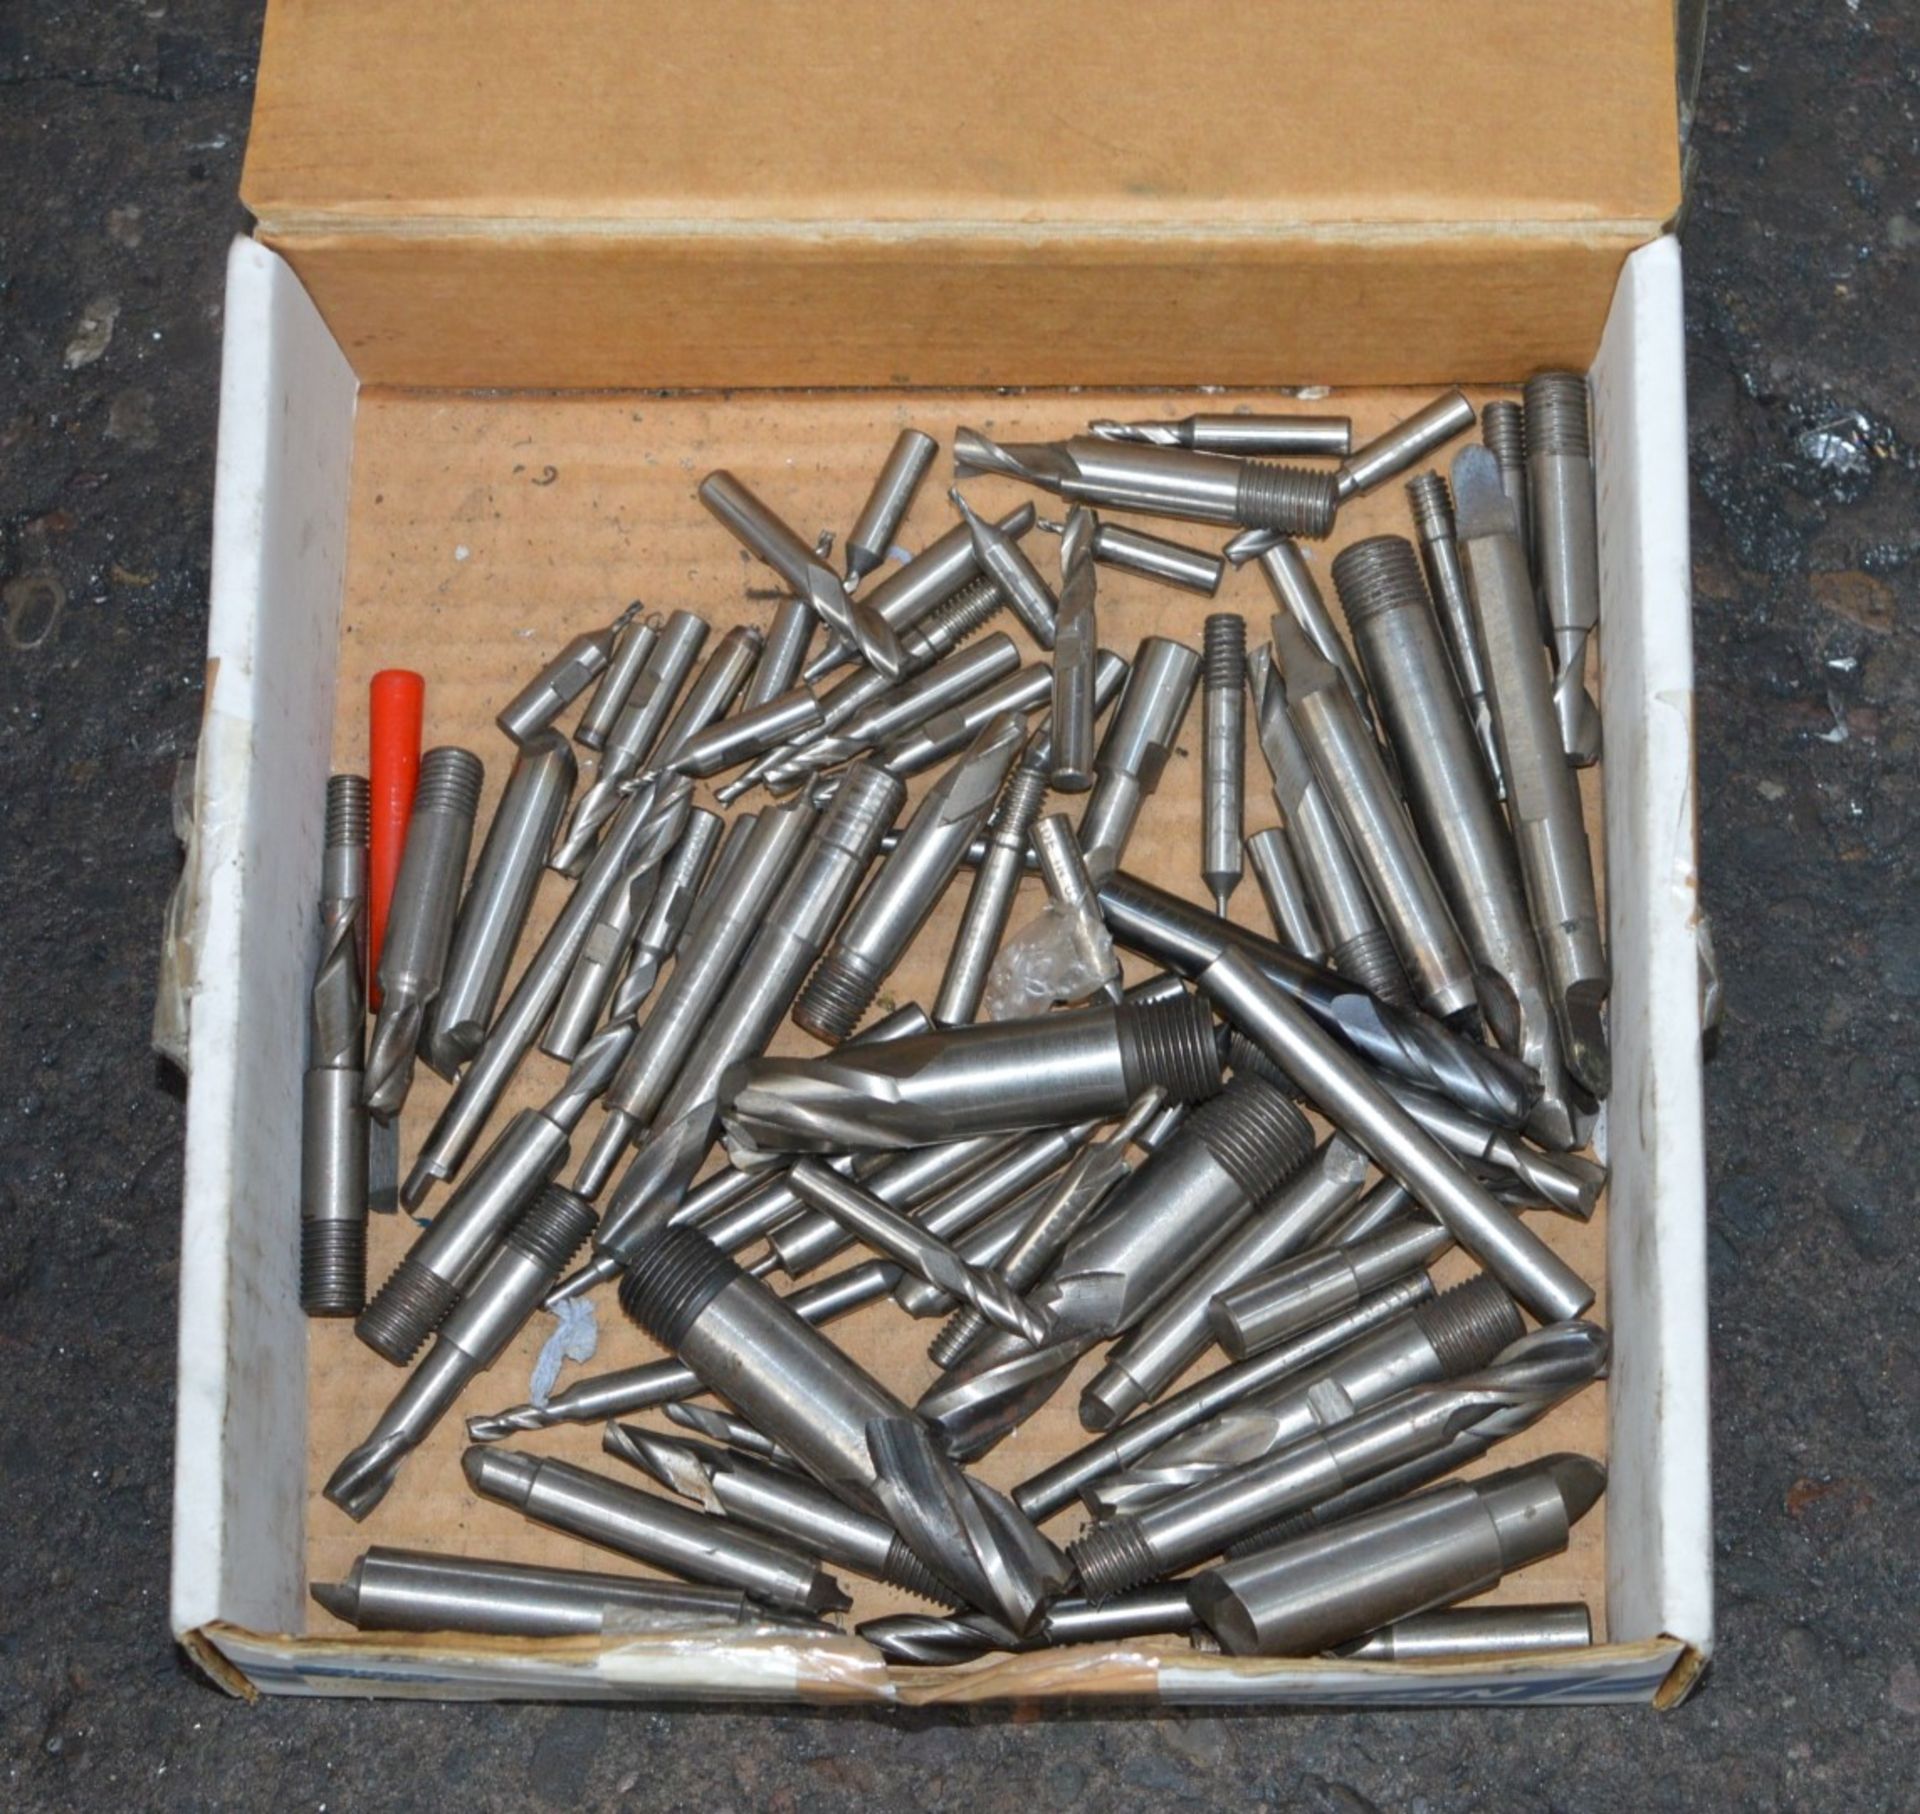 1 x Assorted Collection of Various Tools - Includes Approx 150 Pieces - Spanners, Allen Keys, - Image 2 of 8